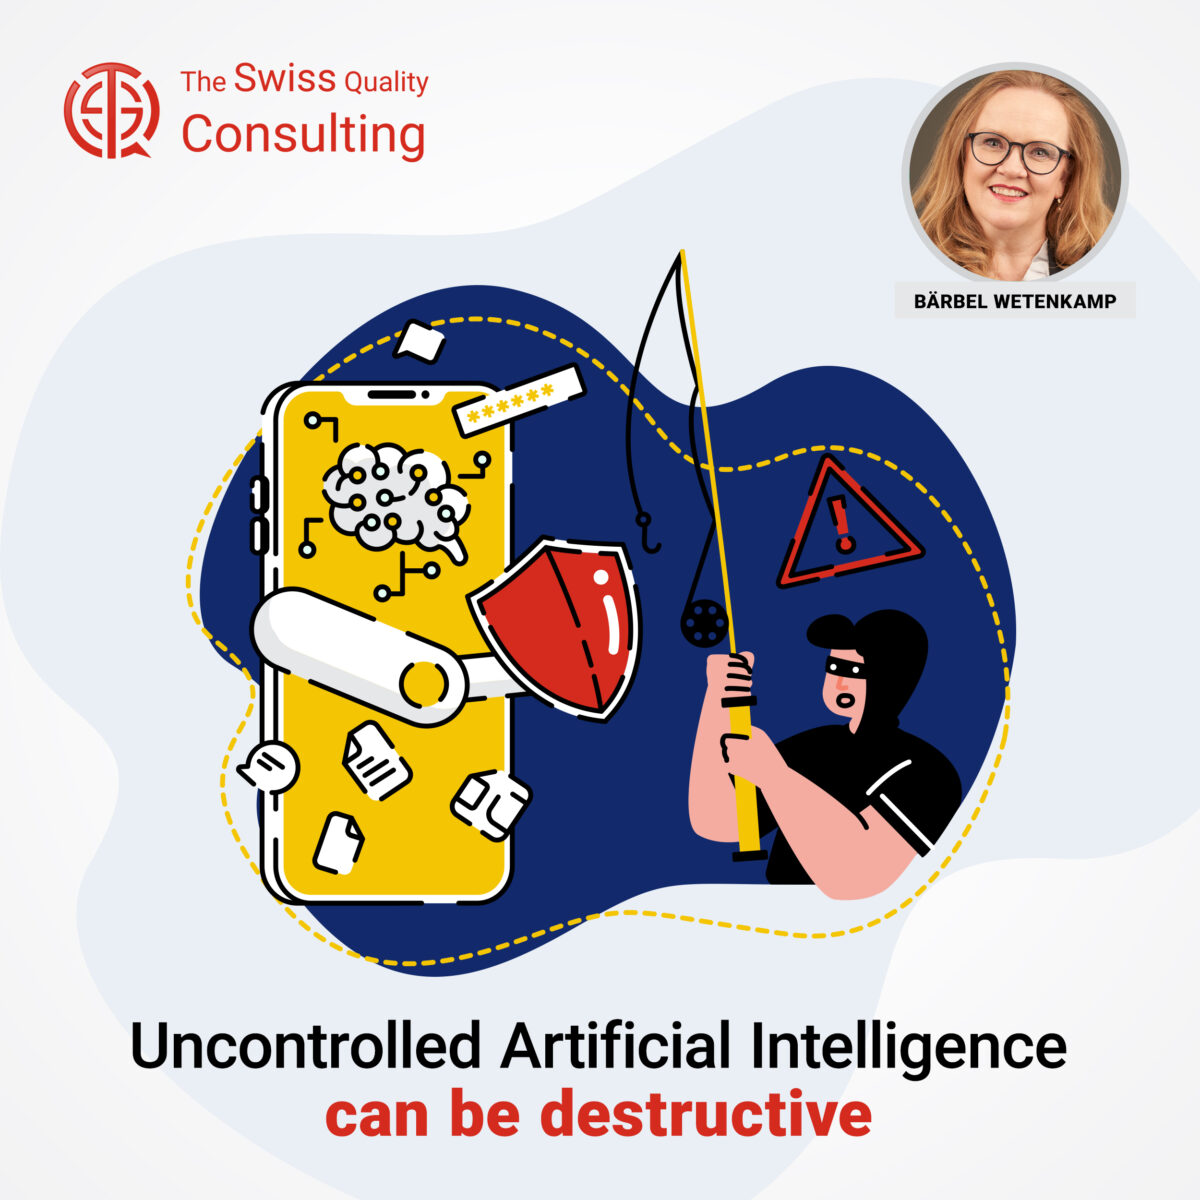 Uncontrolled Artificial Intelligence can be destructive